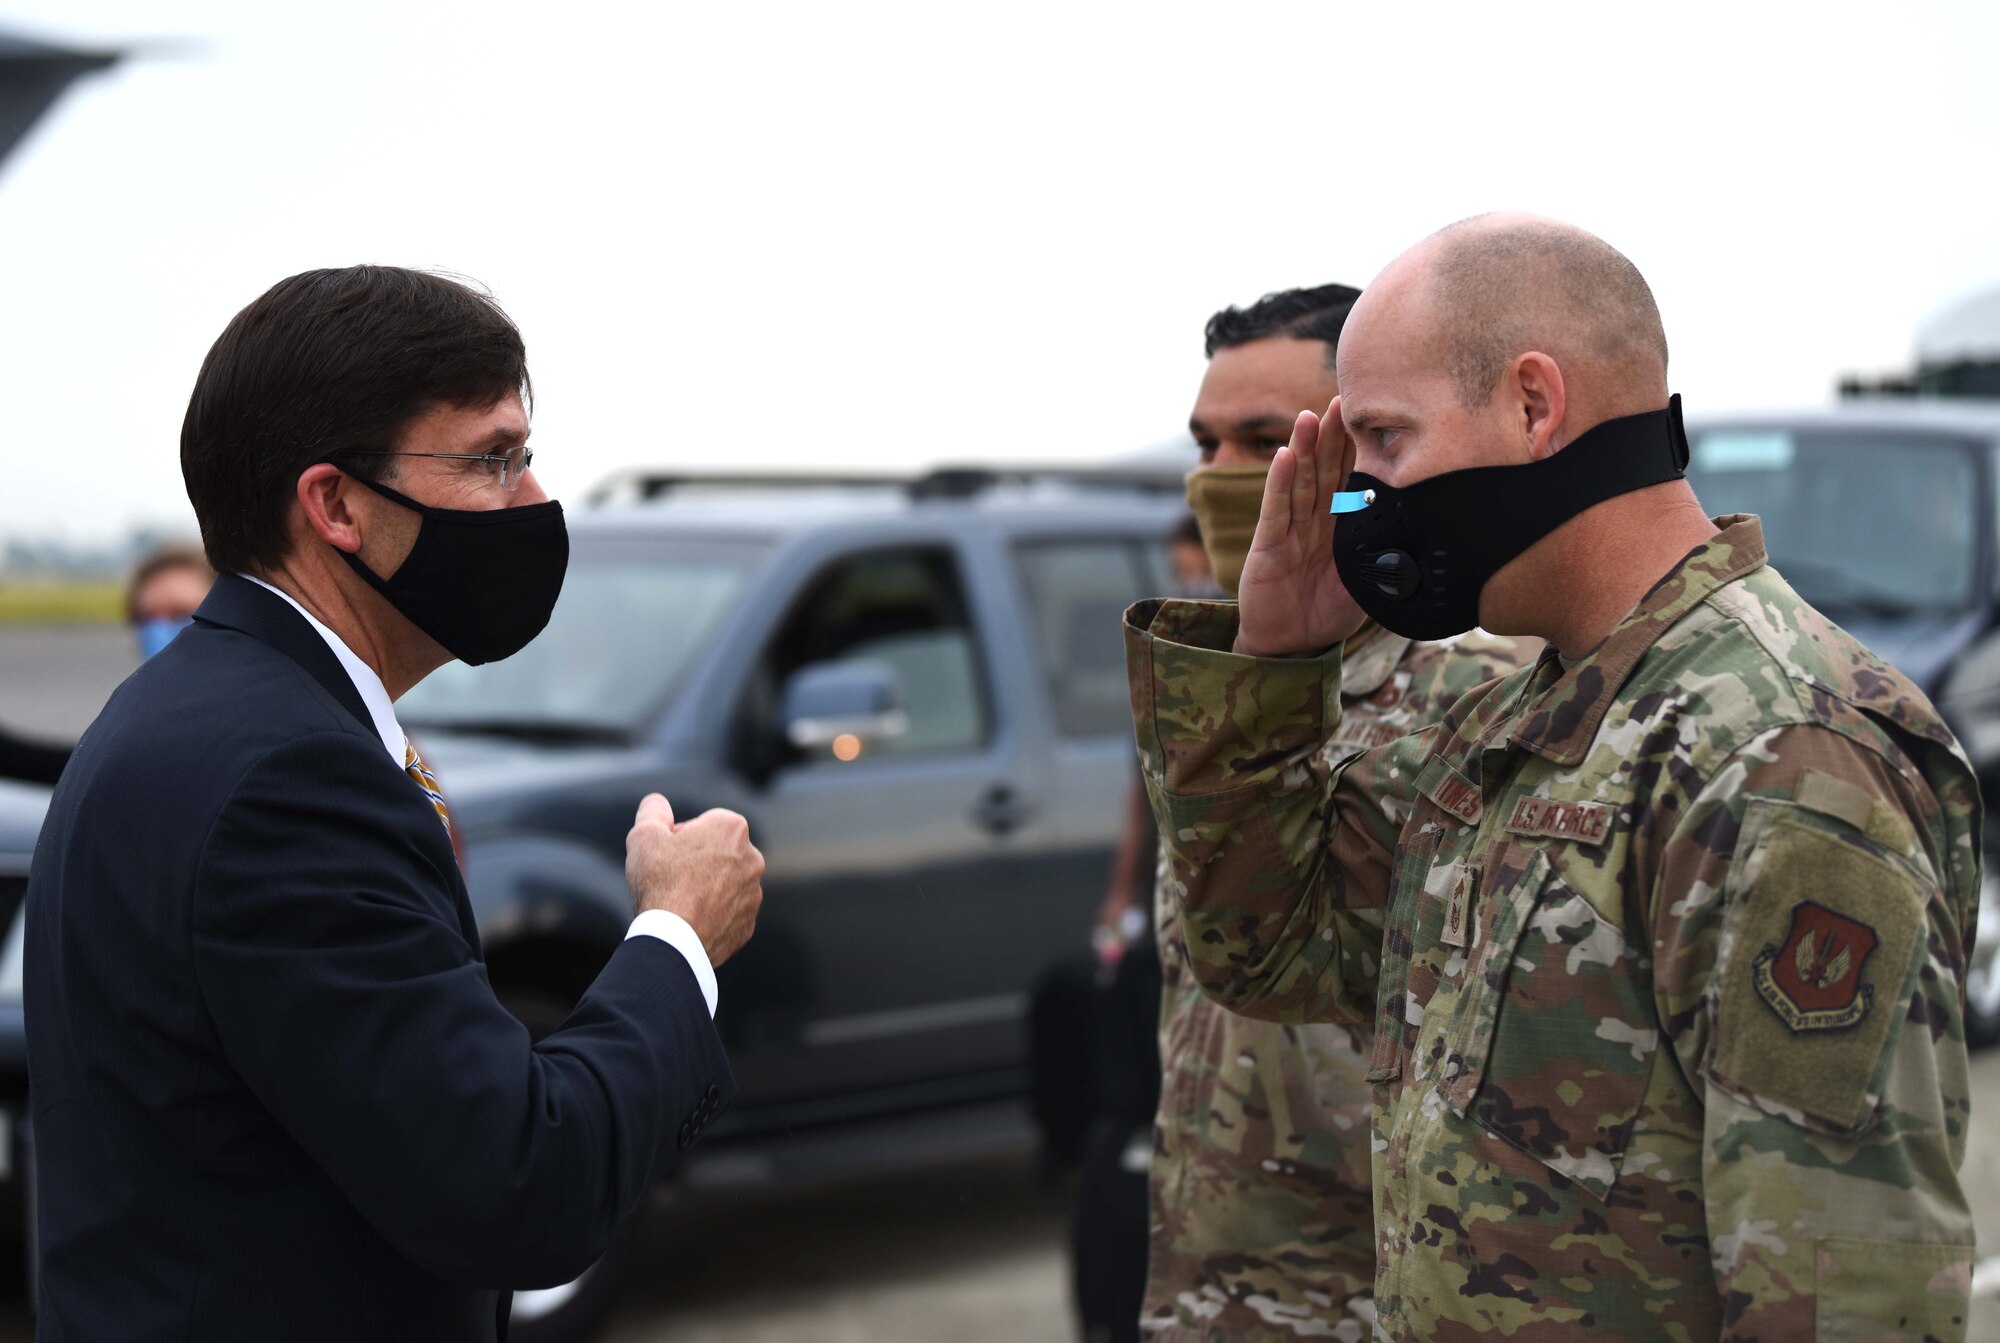 Chief Master Sgt. Douglas Vines, 100th Civil Engineer Squadron career enlisted manager, salutes U.S. Secretary of Defense Dr. Mark T. Esper before his departure from RAF Mildenhall, England, June 26, 2020. Esper met with 100th ARW, 352nd Special Operations Wing, Royal Air Force and tenant unit leadership to learn of the various mission sets and discuss the base’s role in operations in both the European and African theaters. (U.S. Air Force photo by Brandon Esau)